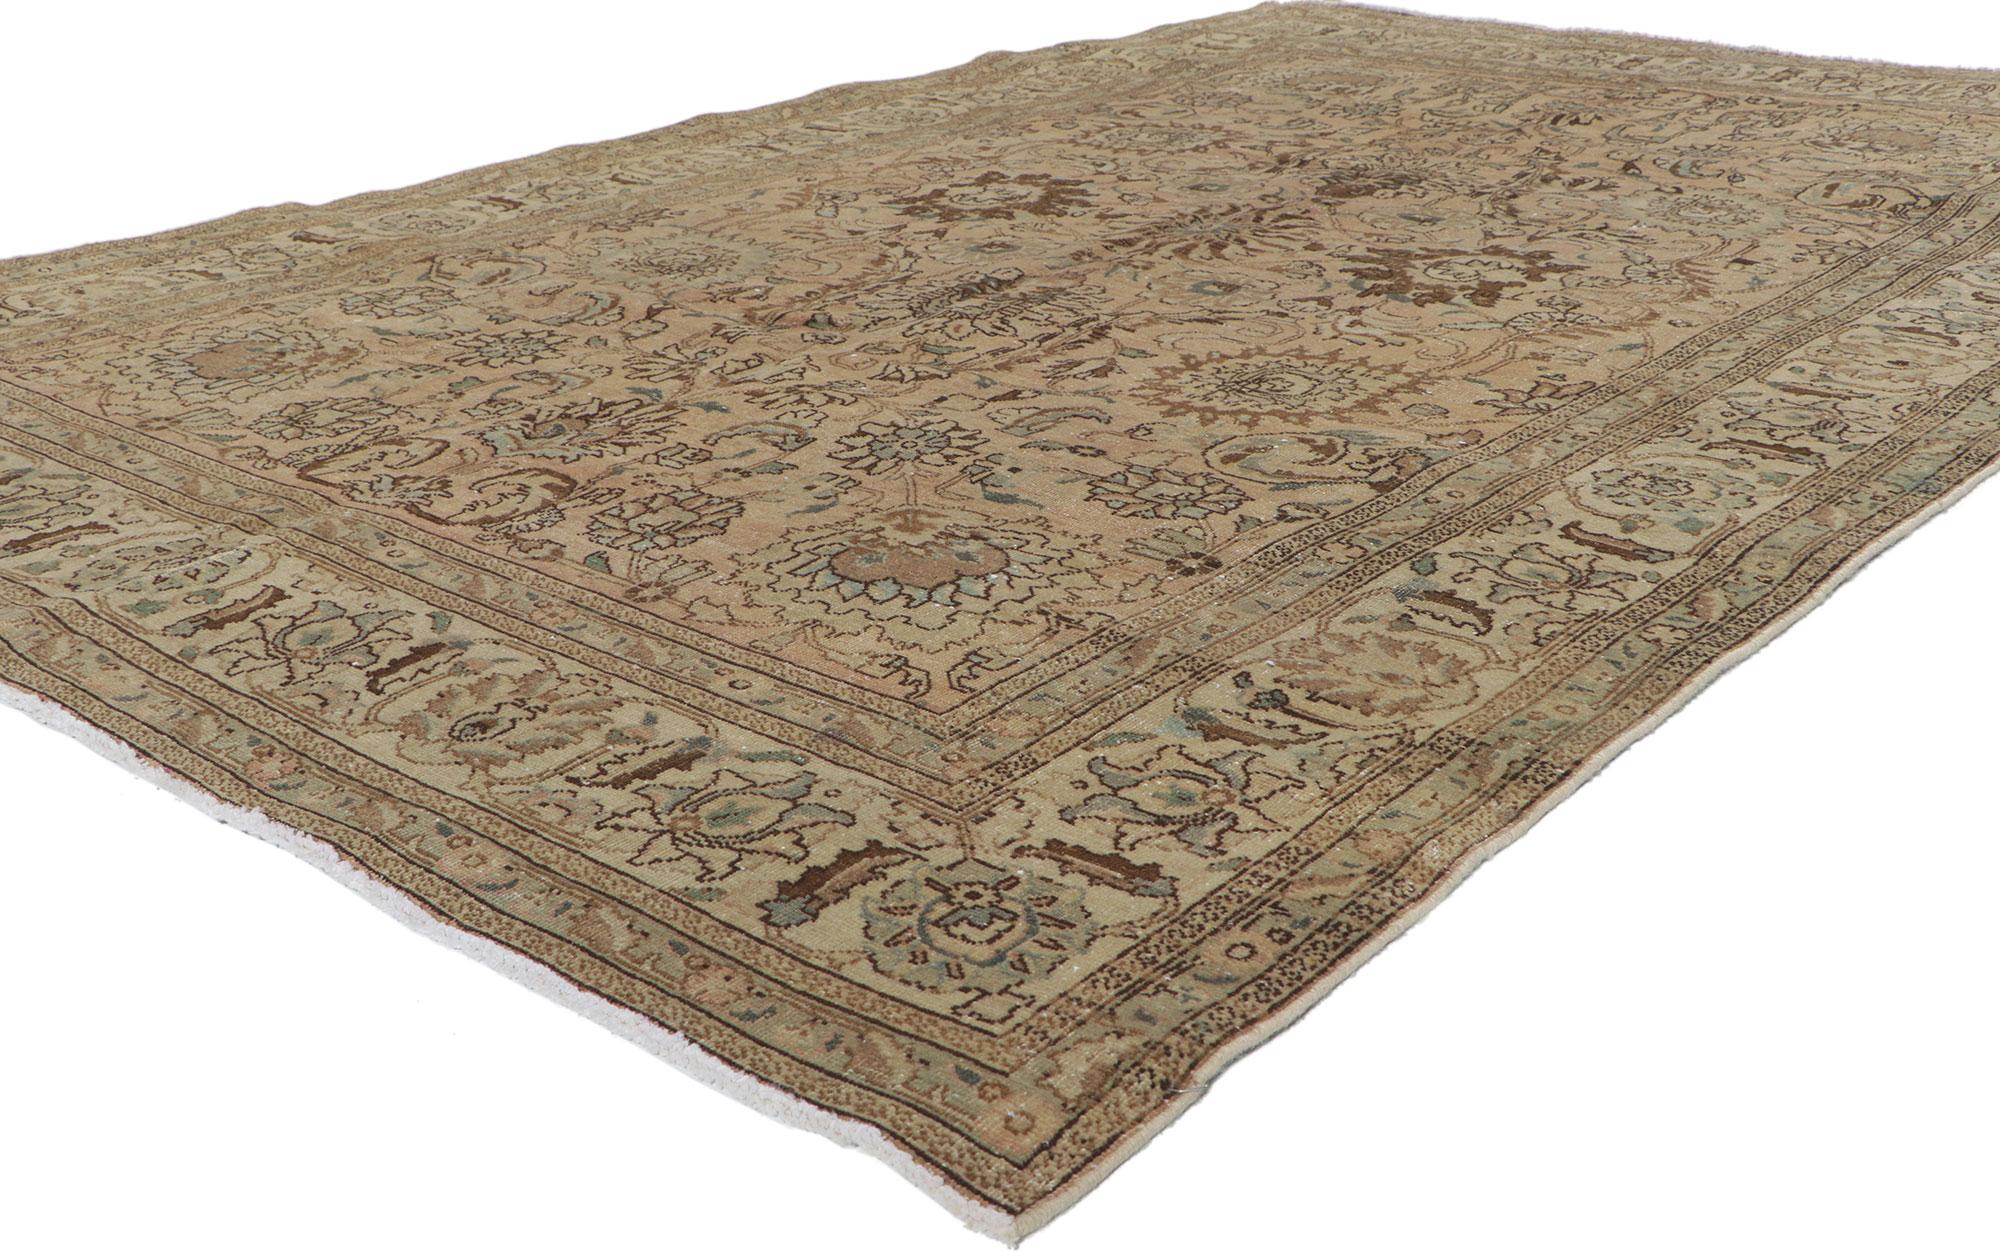 60969 Vintage Persian Tabriz Rug 06'04 x 09'06. Warm and inviting, this hand-knotted wool vintage Persian Tabriz rug features an all-over botanical pattern enclosed with a classic Herati border. With its timeless design and understated elegance,